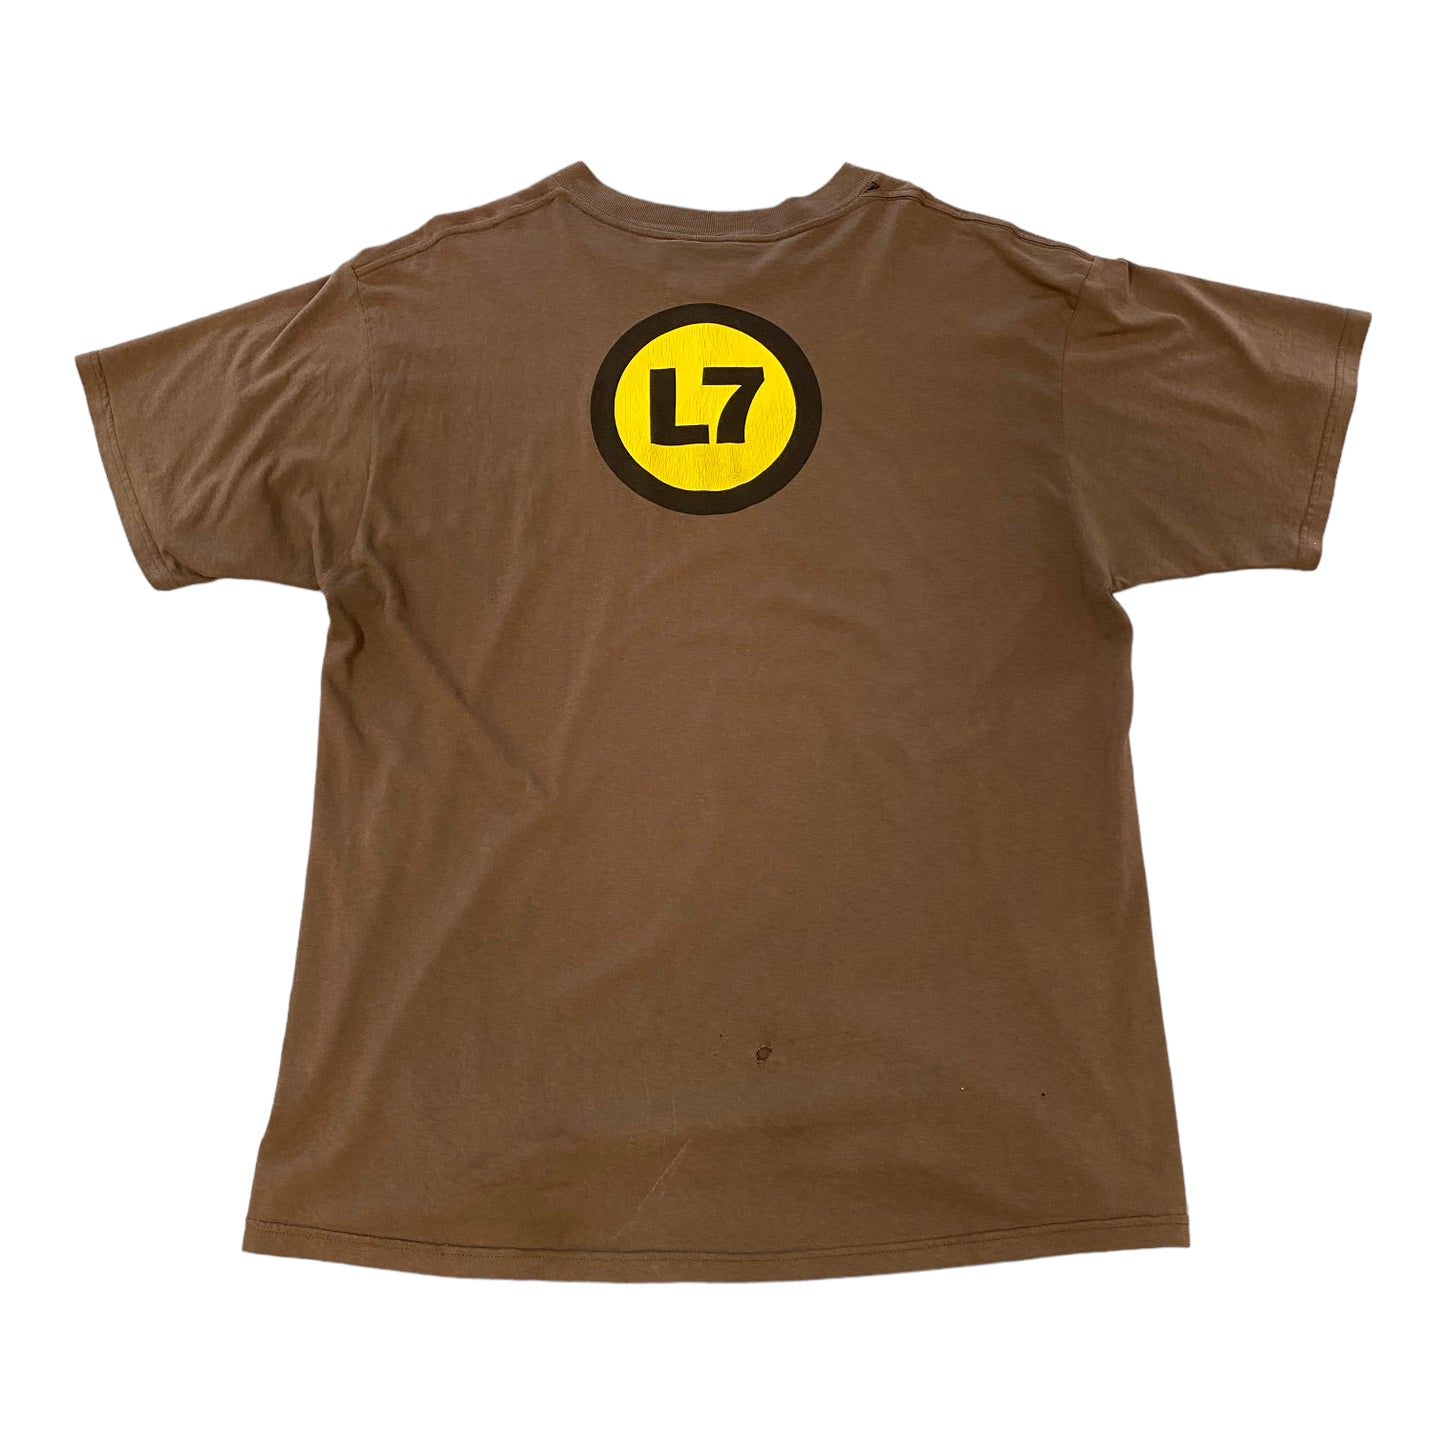 1994 L7 "Hungry for The Stink" Vintage Tour T-shirt